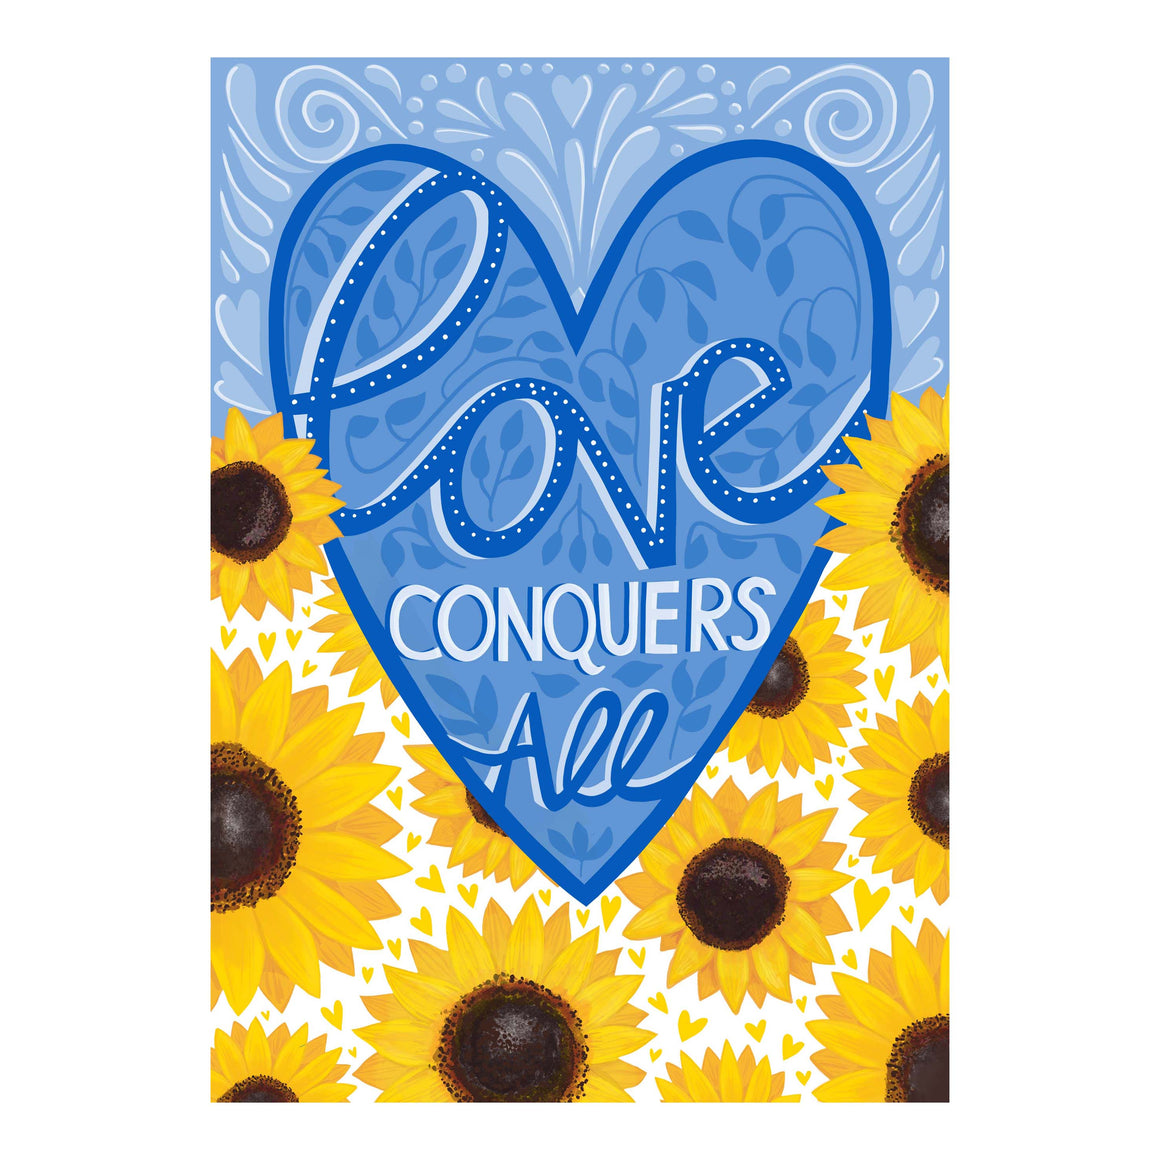 'LOVE CONQUERS ALL' A4 PRINT - £1 CHARITY DOWNLOAD